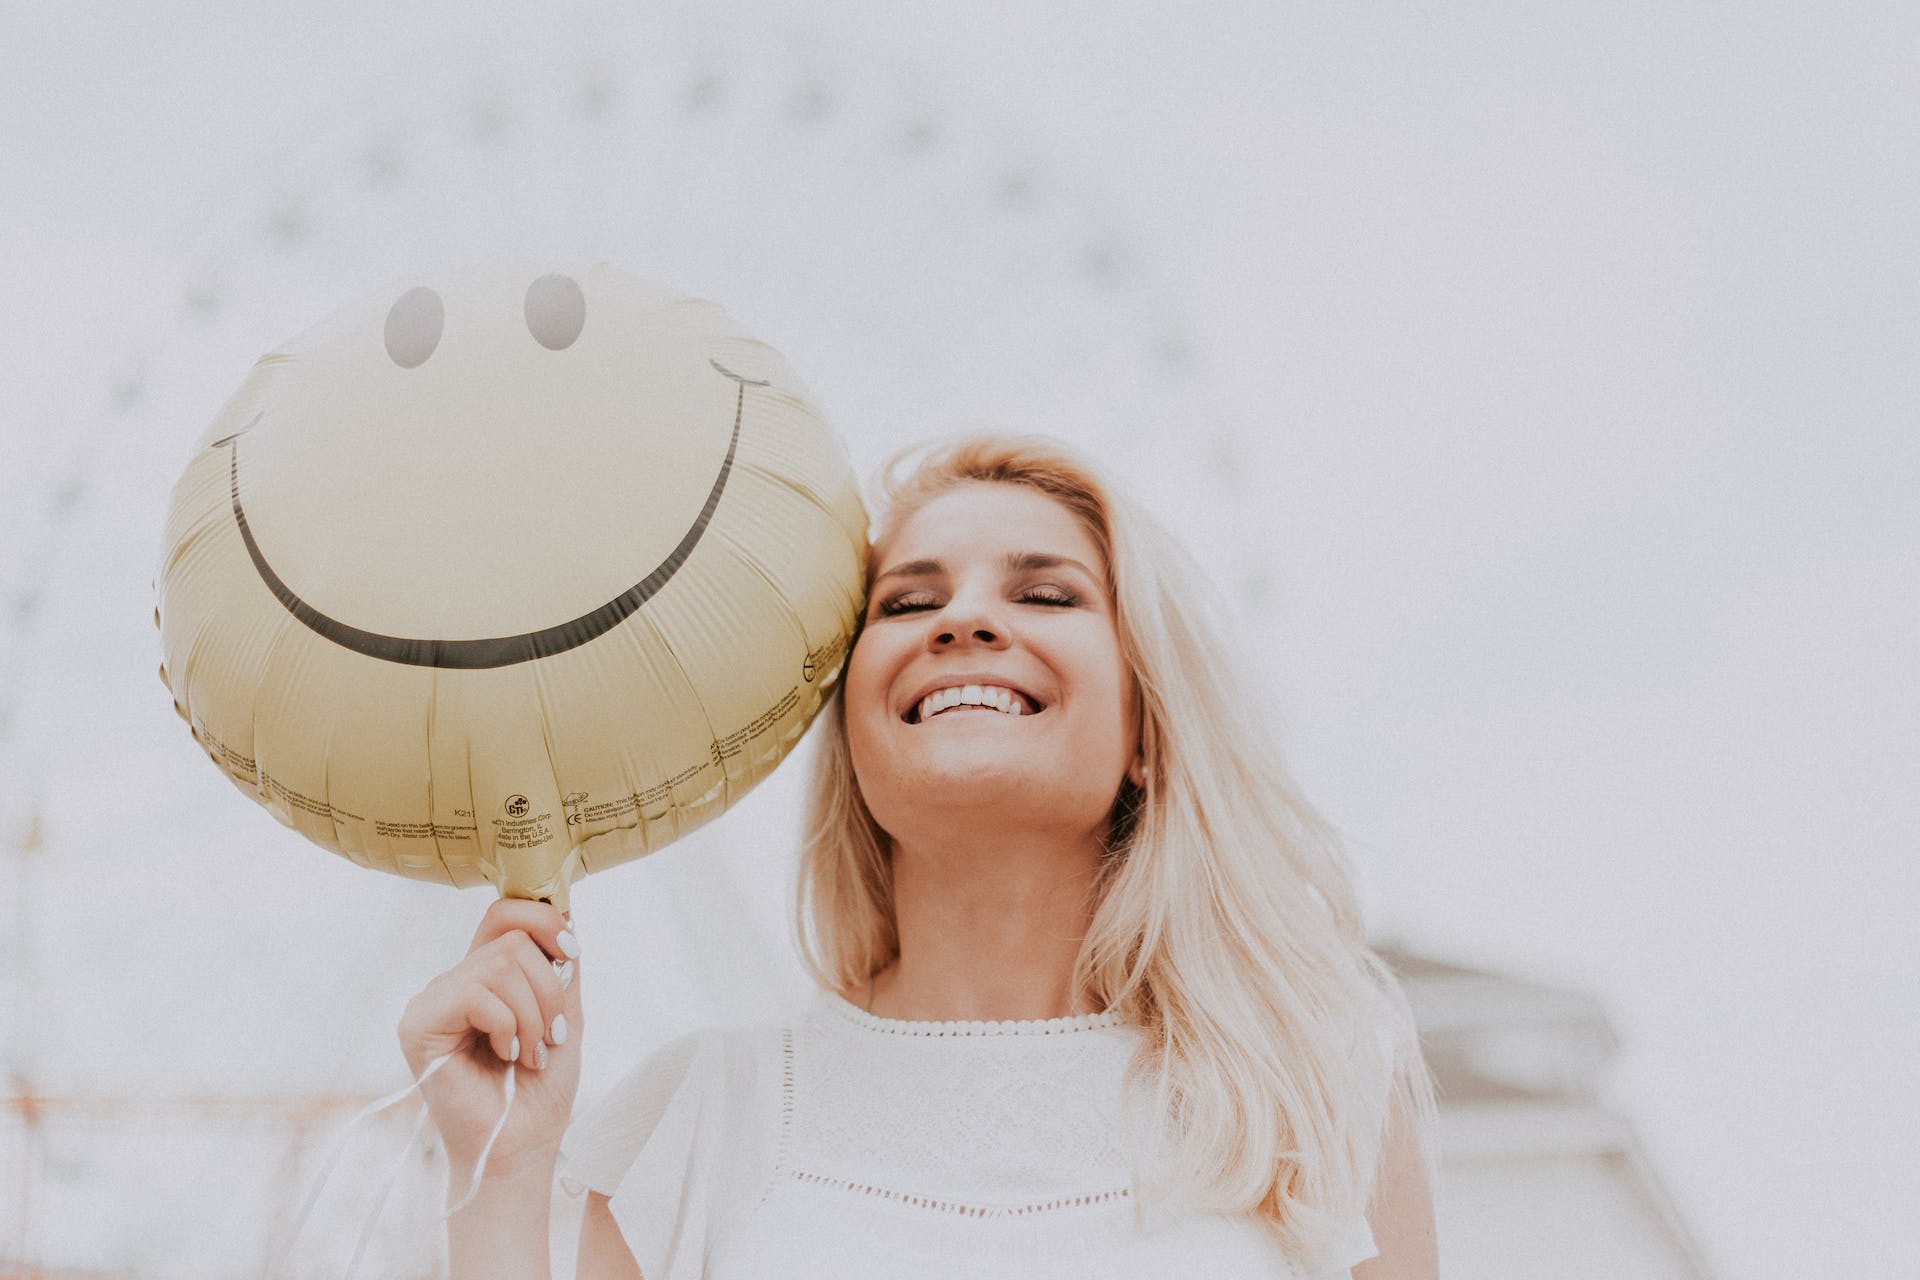 Woman smiling while holding a happy face balloon